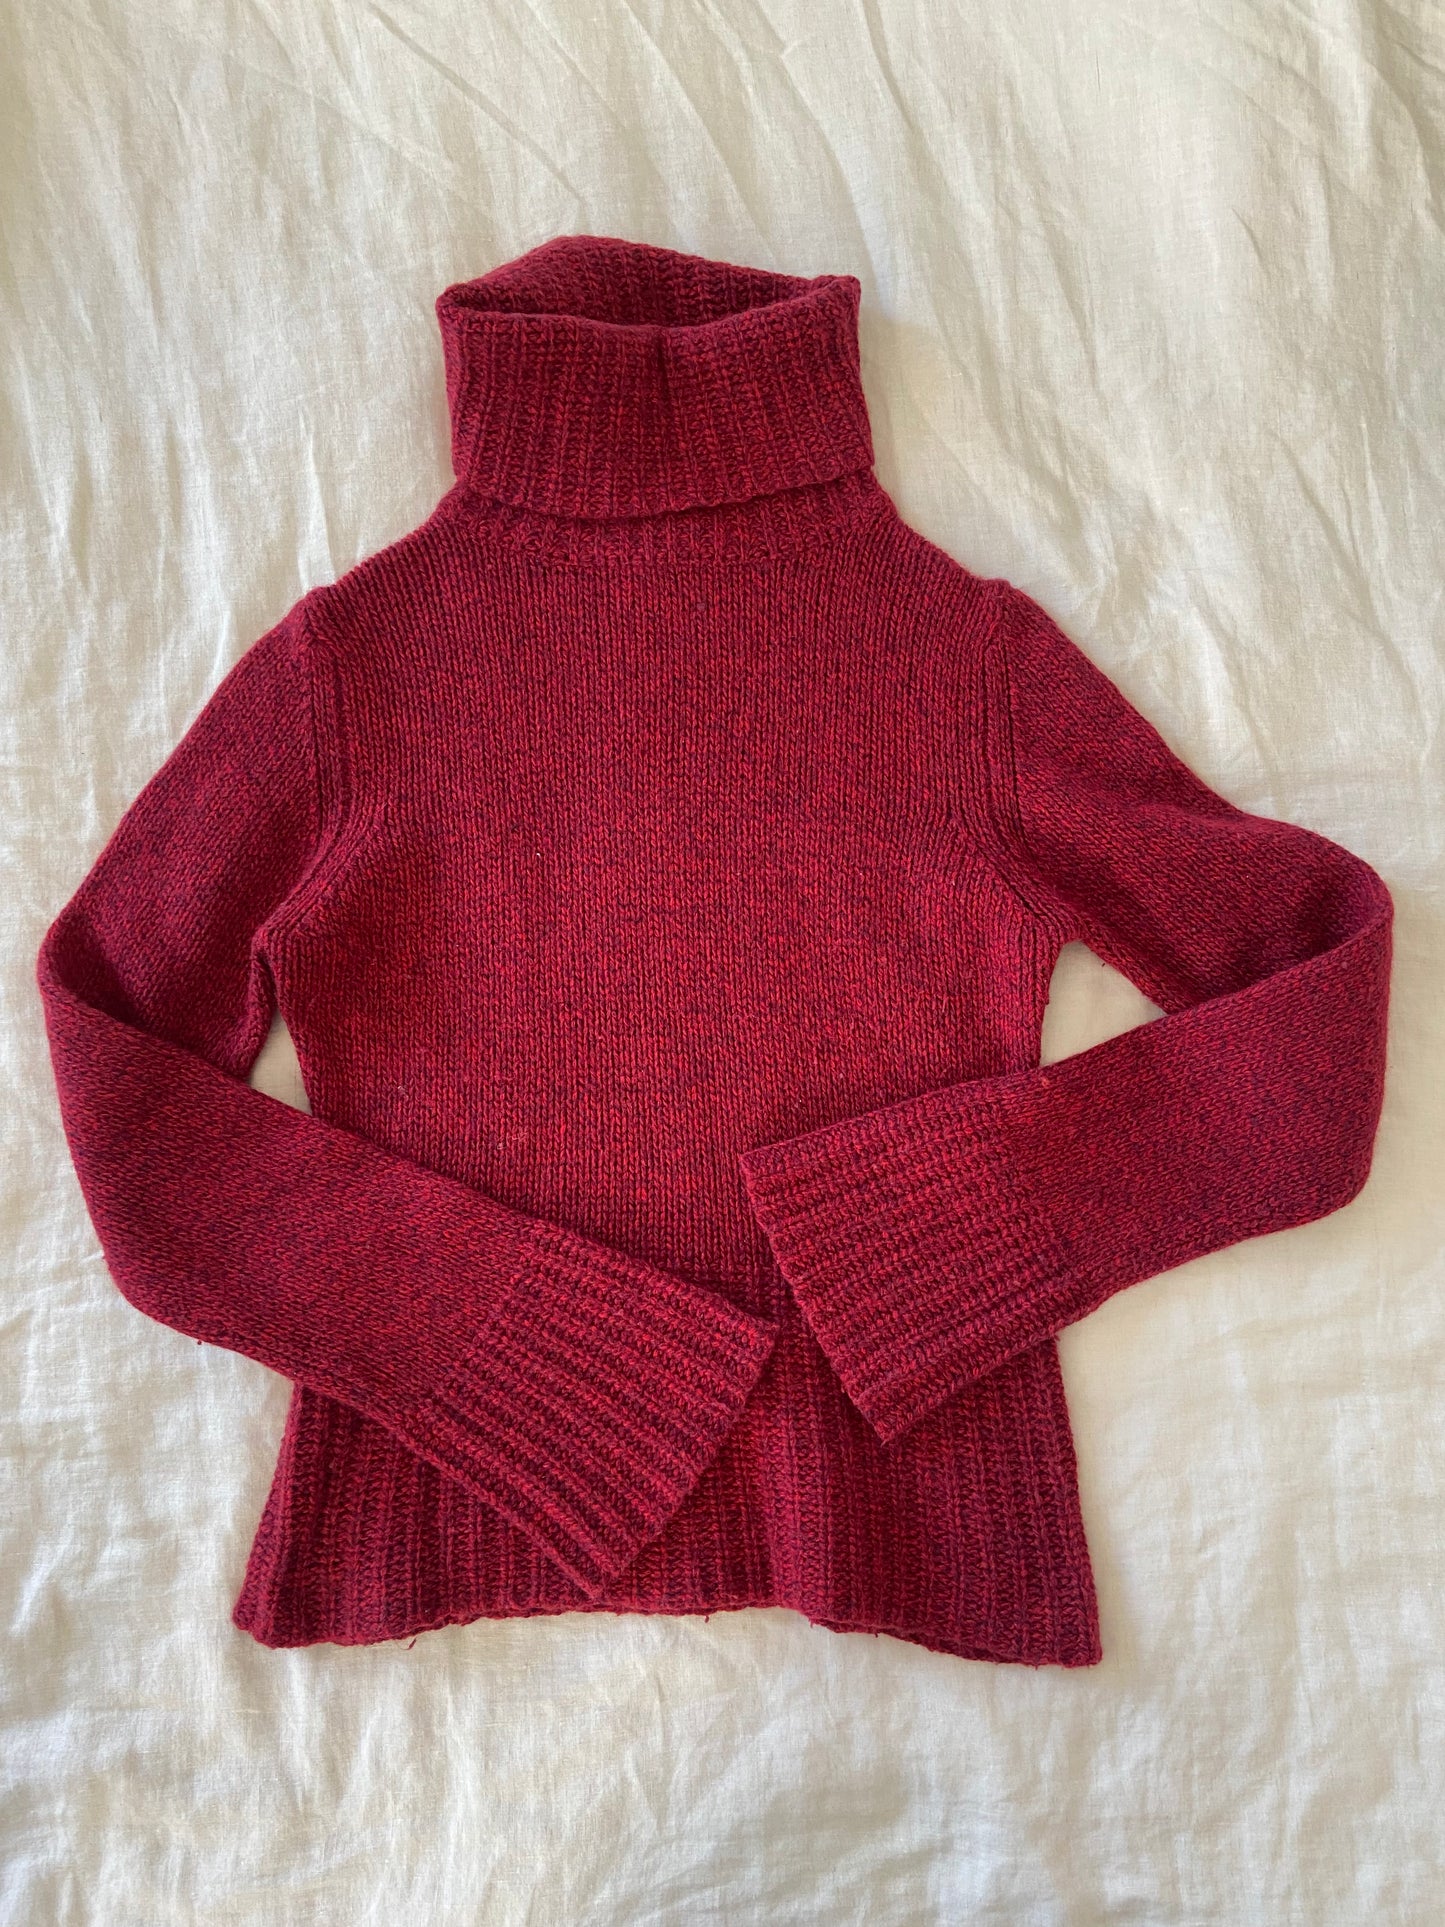 00’s Red wool knit | Size medium